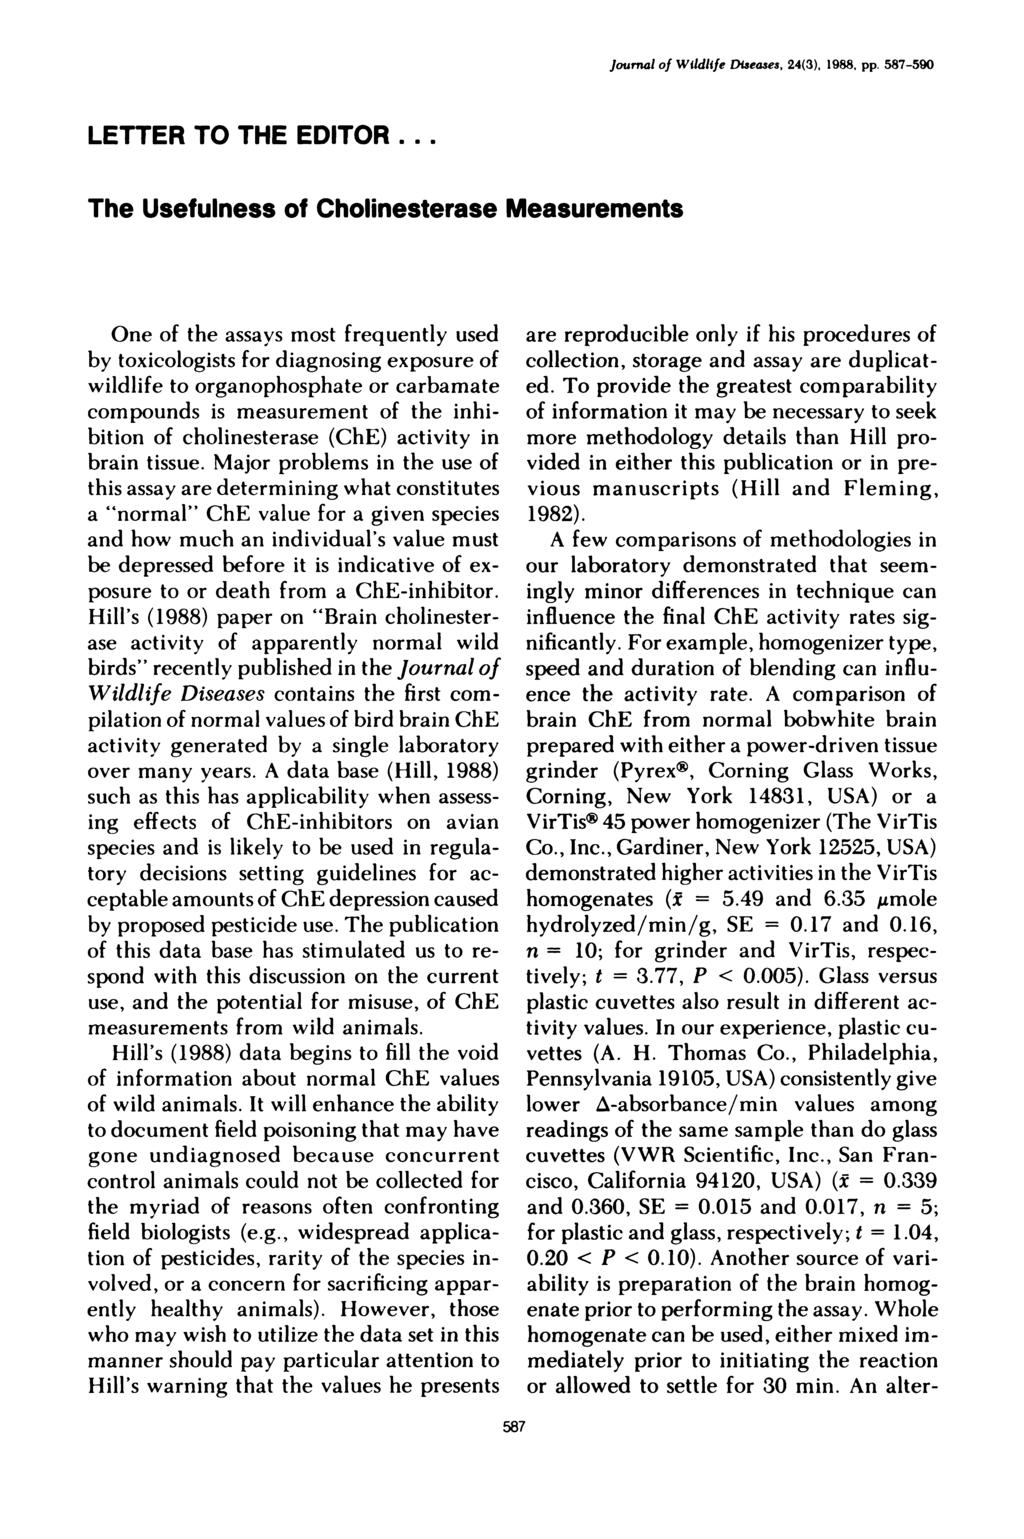 Journal of Wildlife Diseases, 24(3), 1988, pp. 587-590 LETTER TO THE EDITOR.